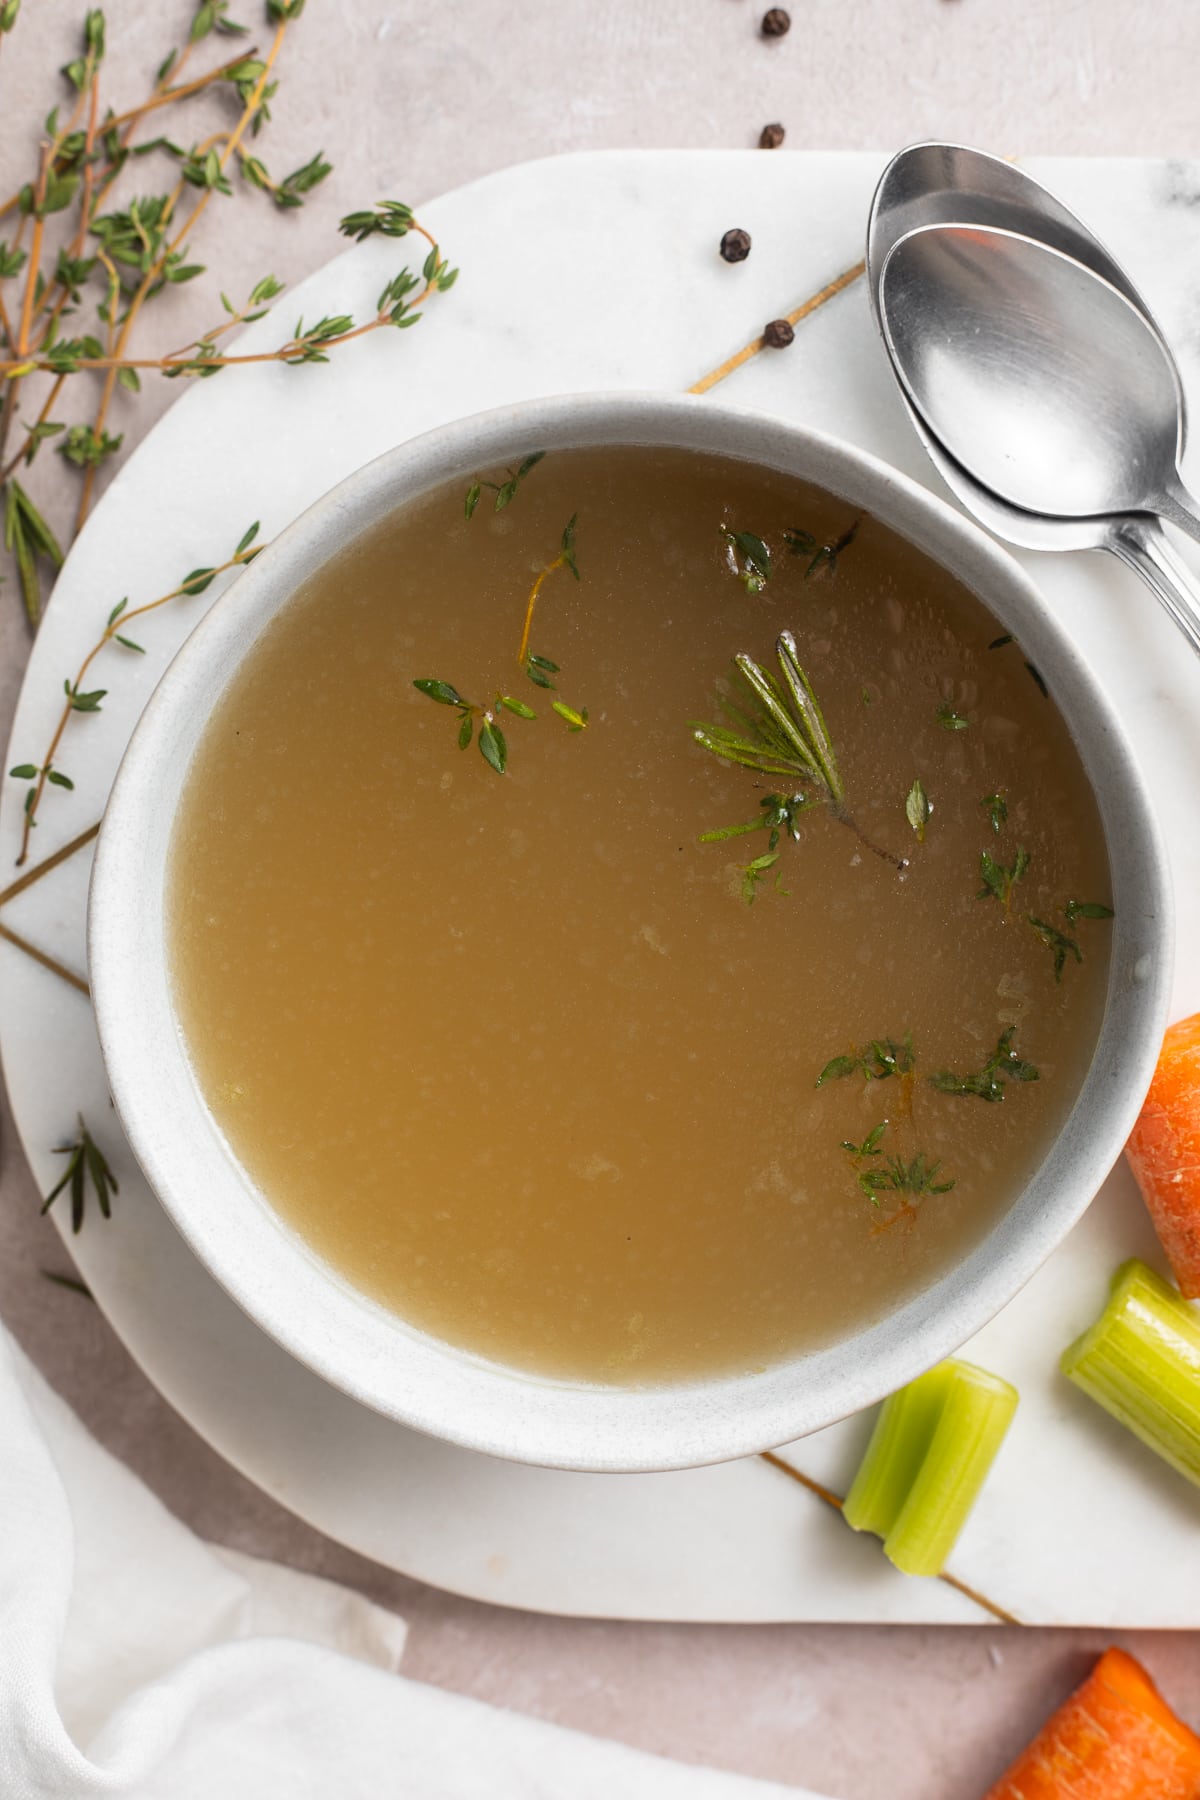 Bone broth: Delicious, and nutritious